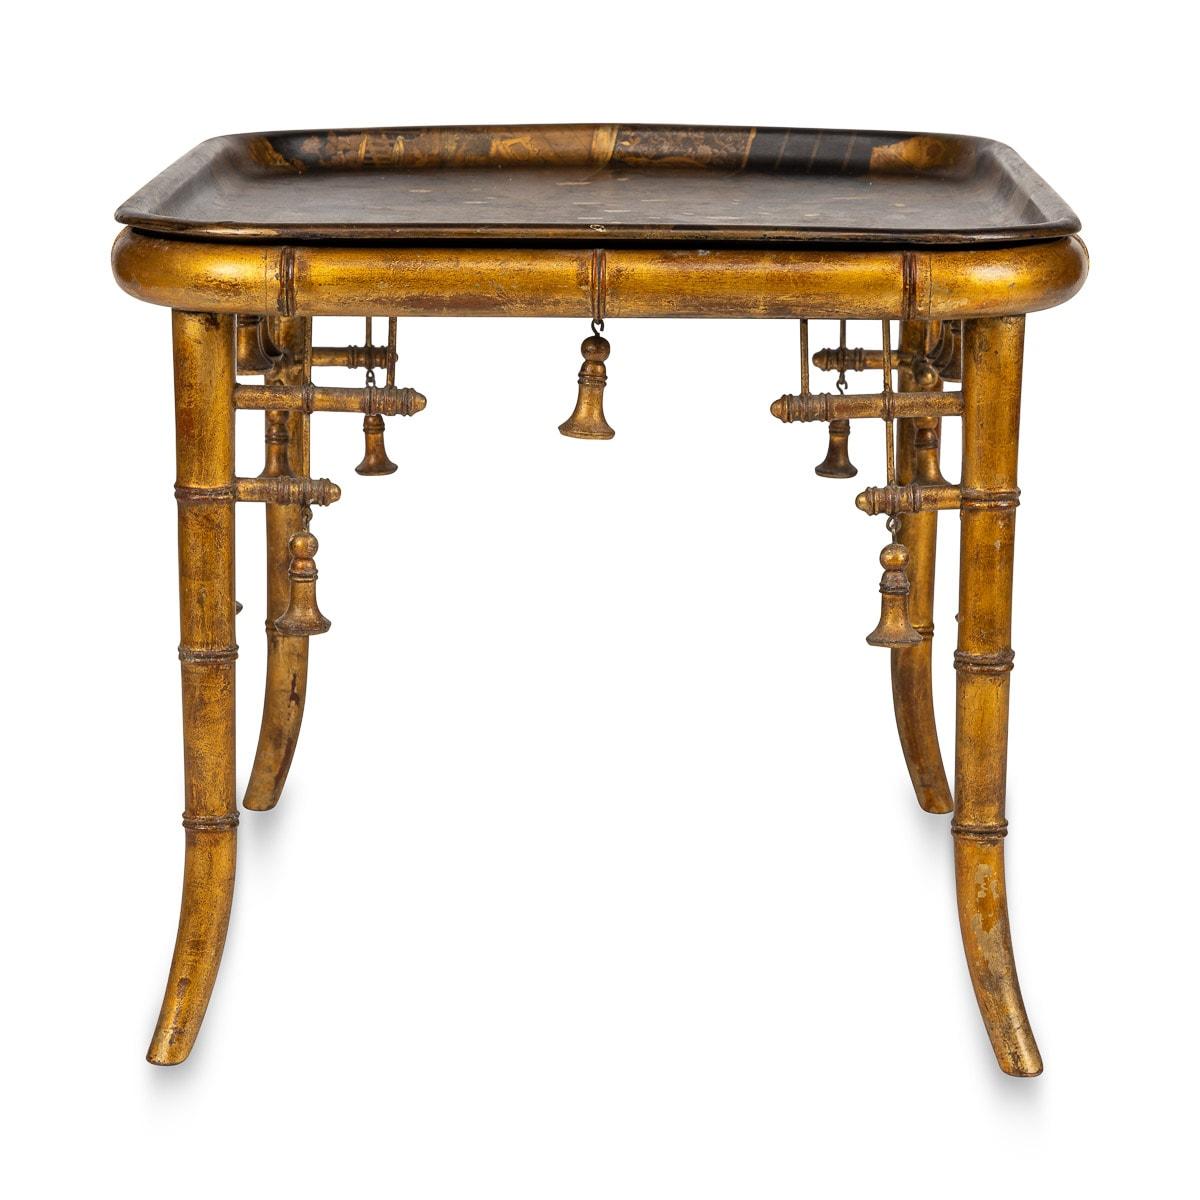 20th Century French Giltwood & Japanese Style Lacquer Table with Tray, C.1880 For Sale 2